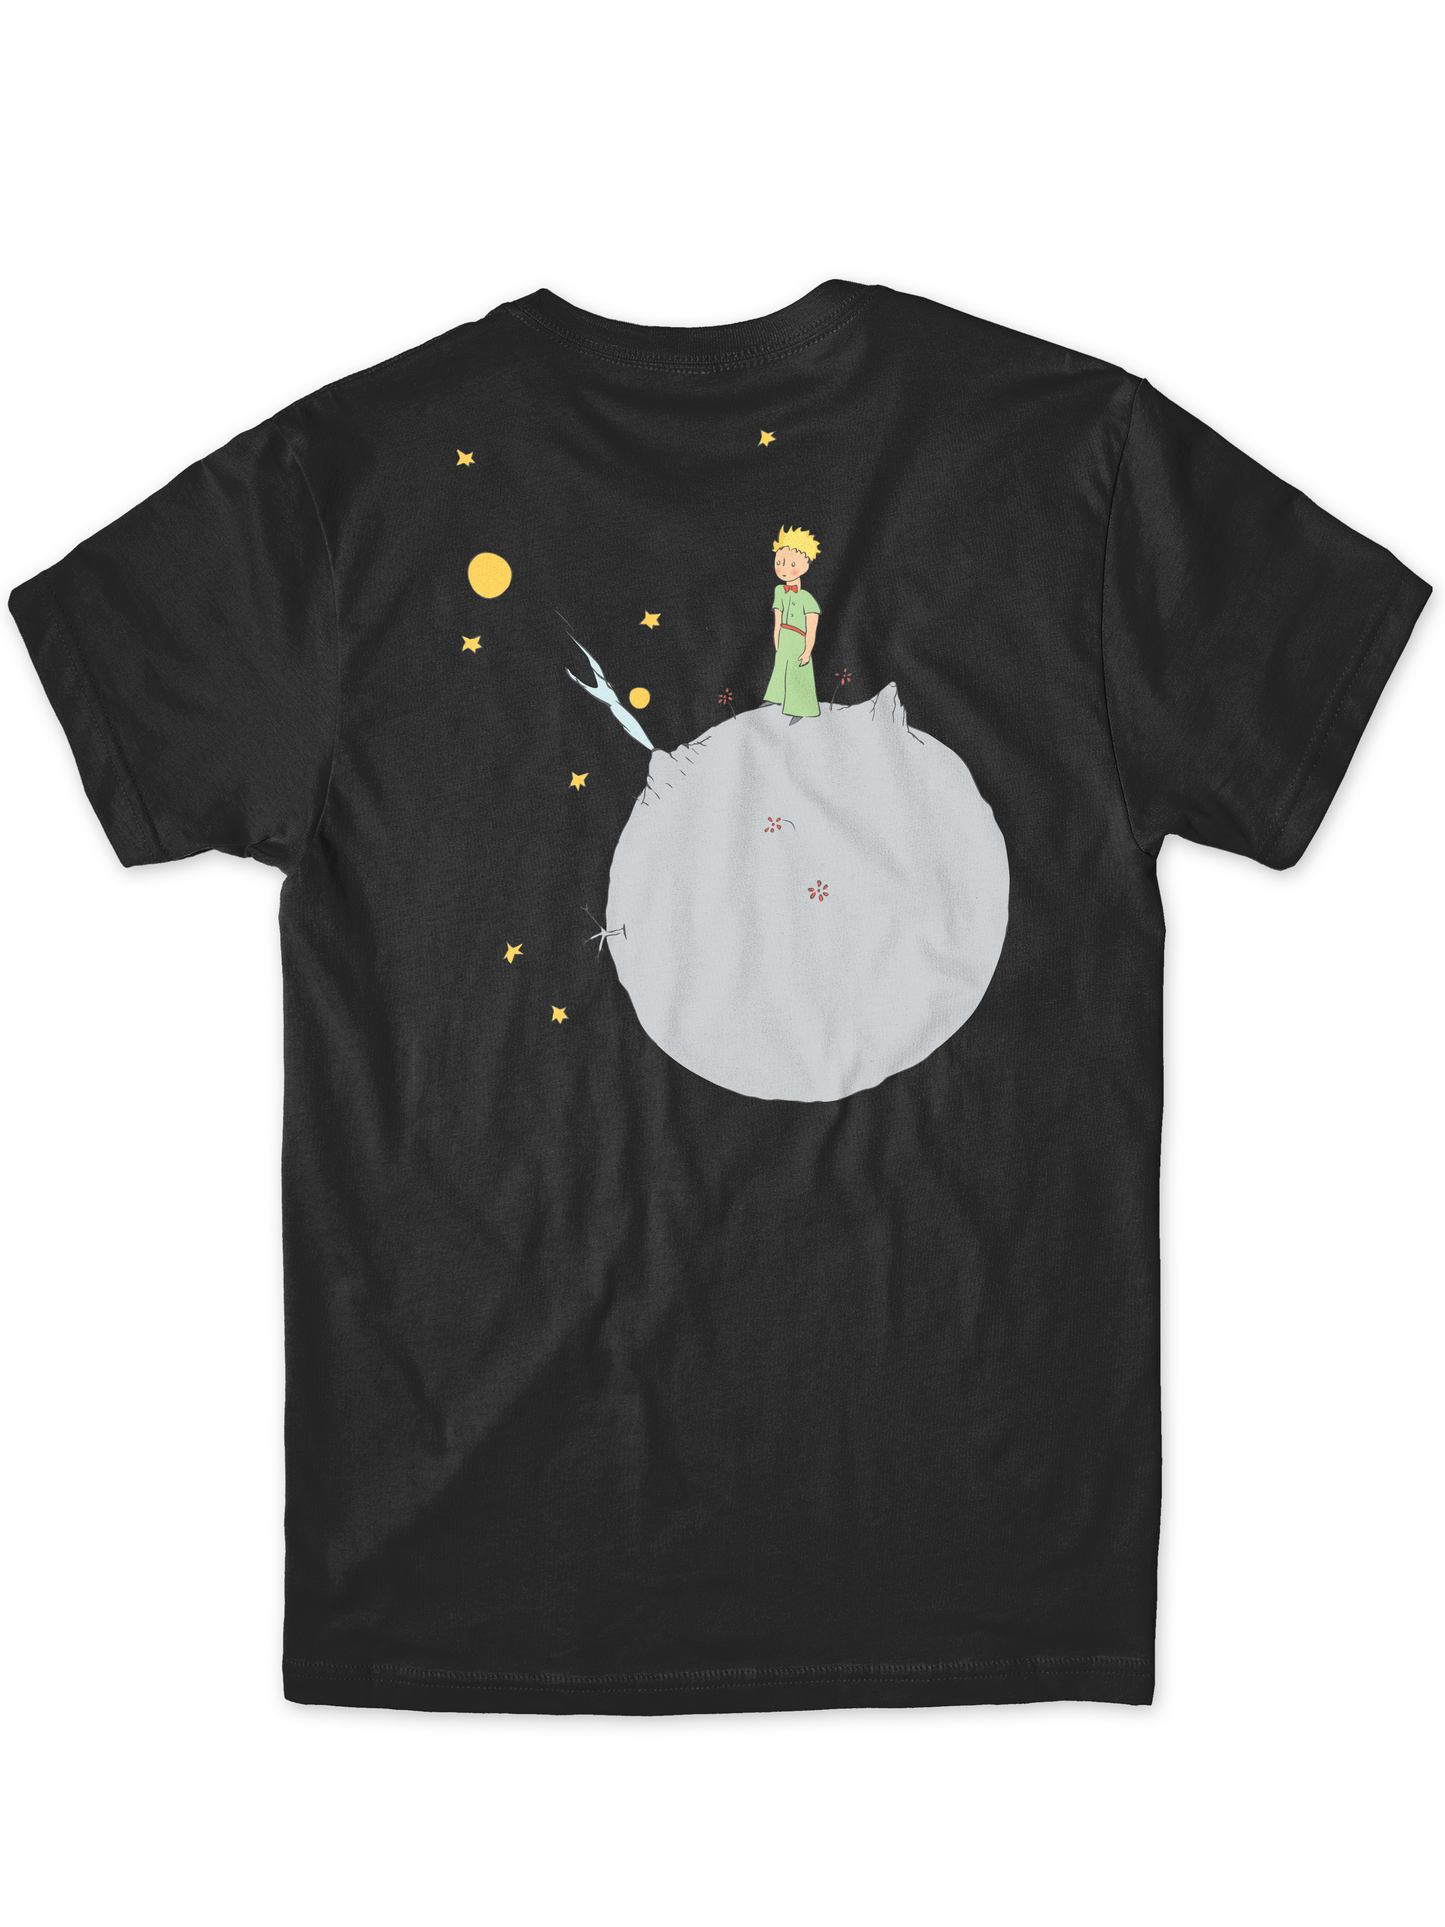 GIRL The Little Prince Planet Tee - Black